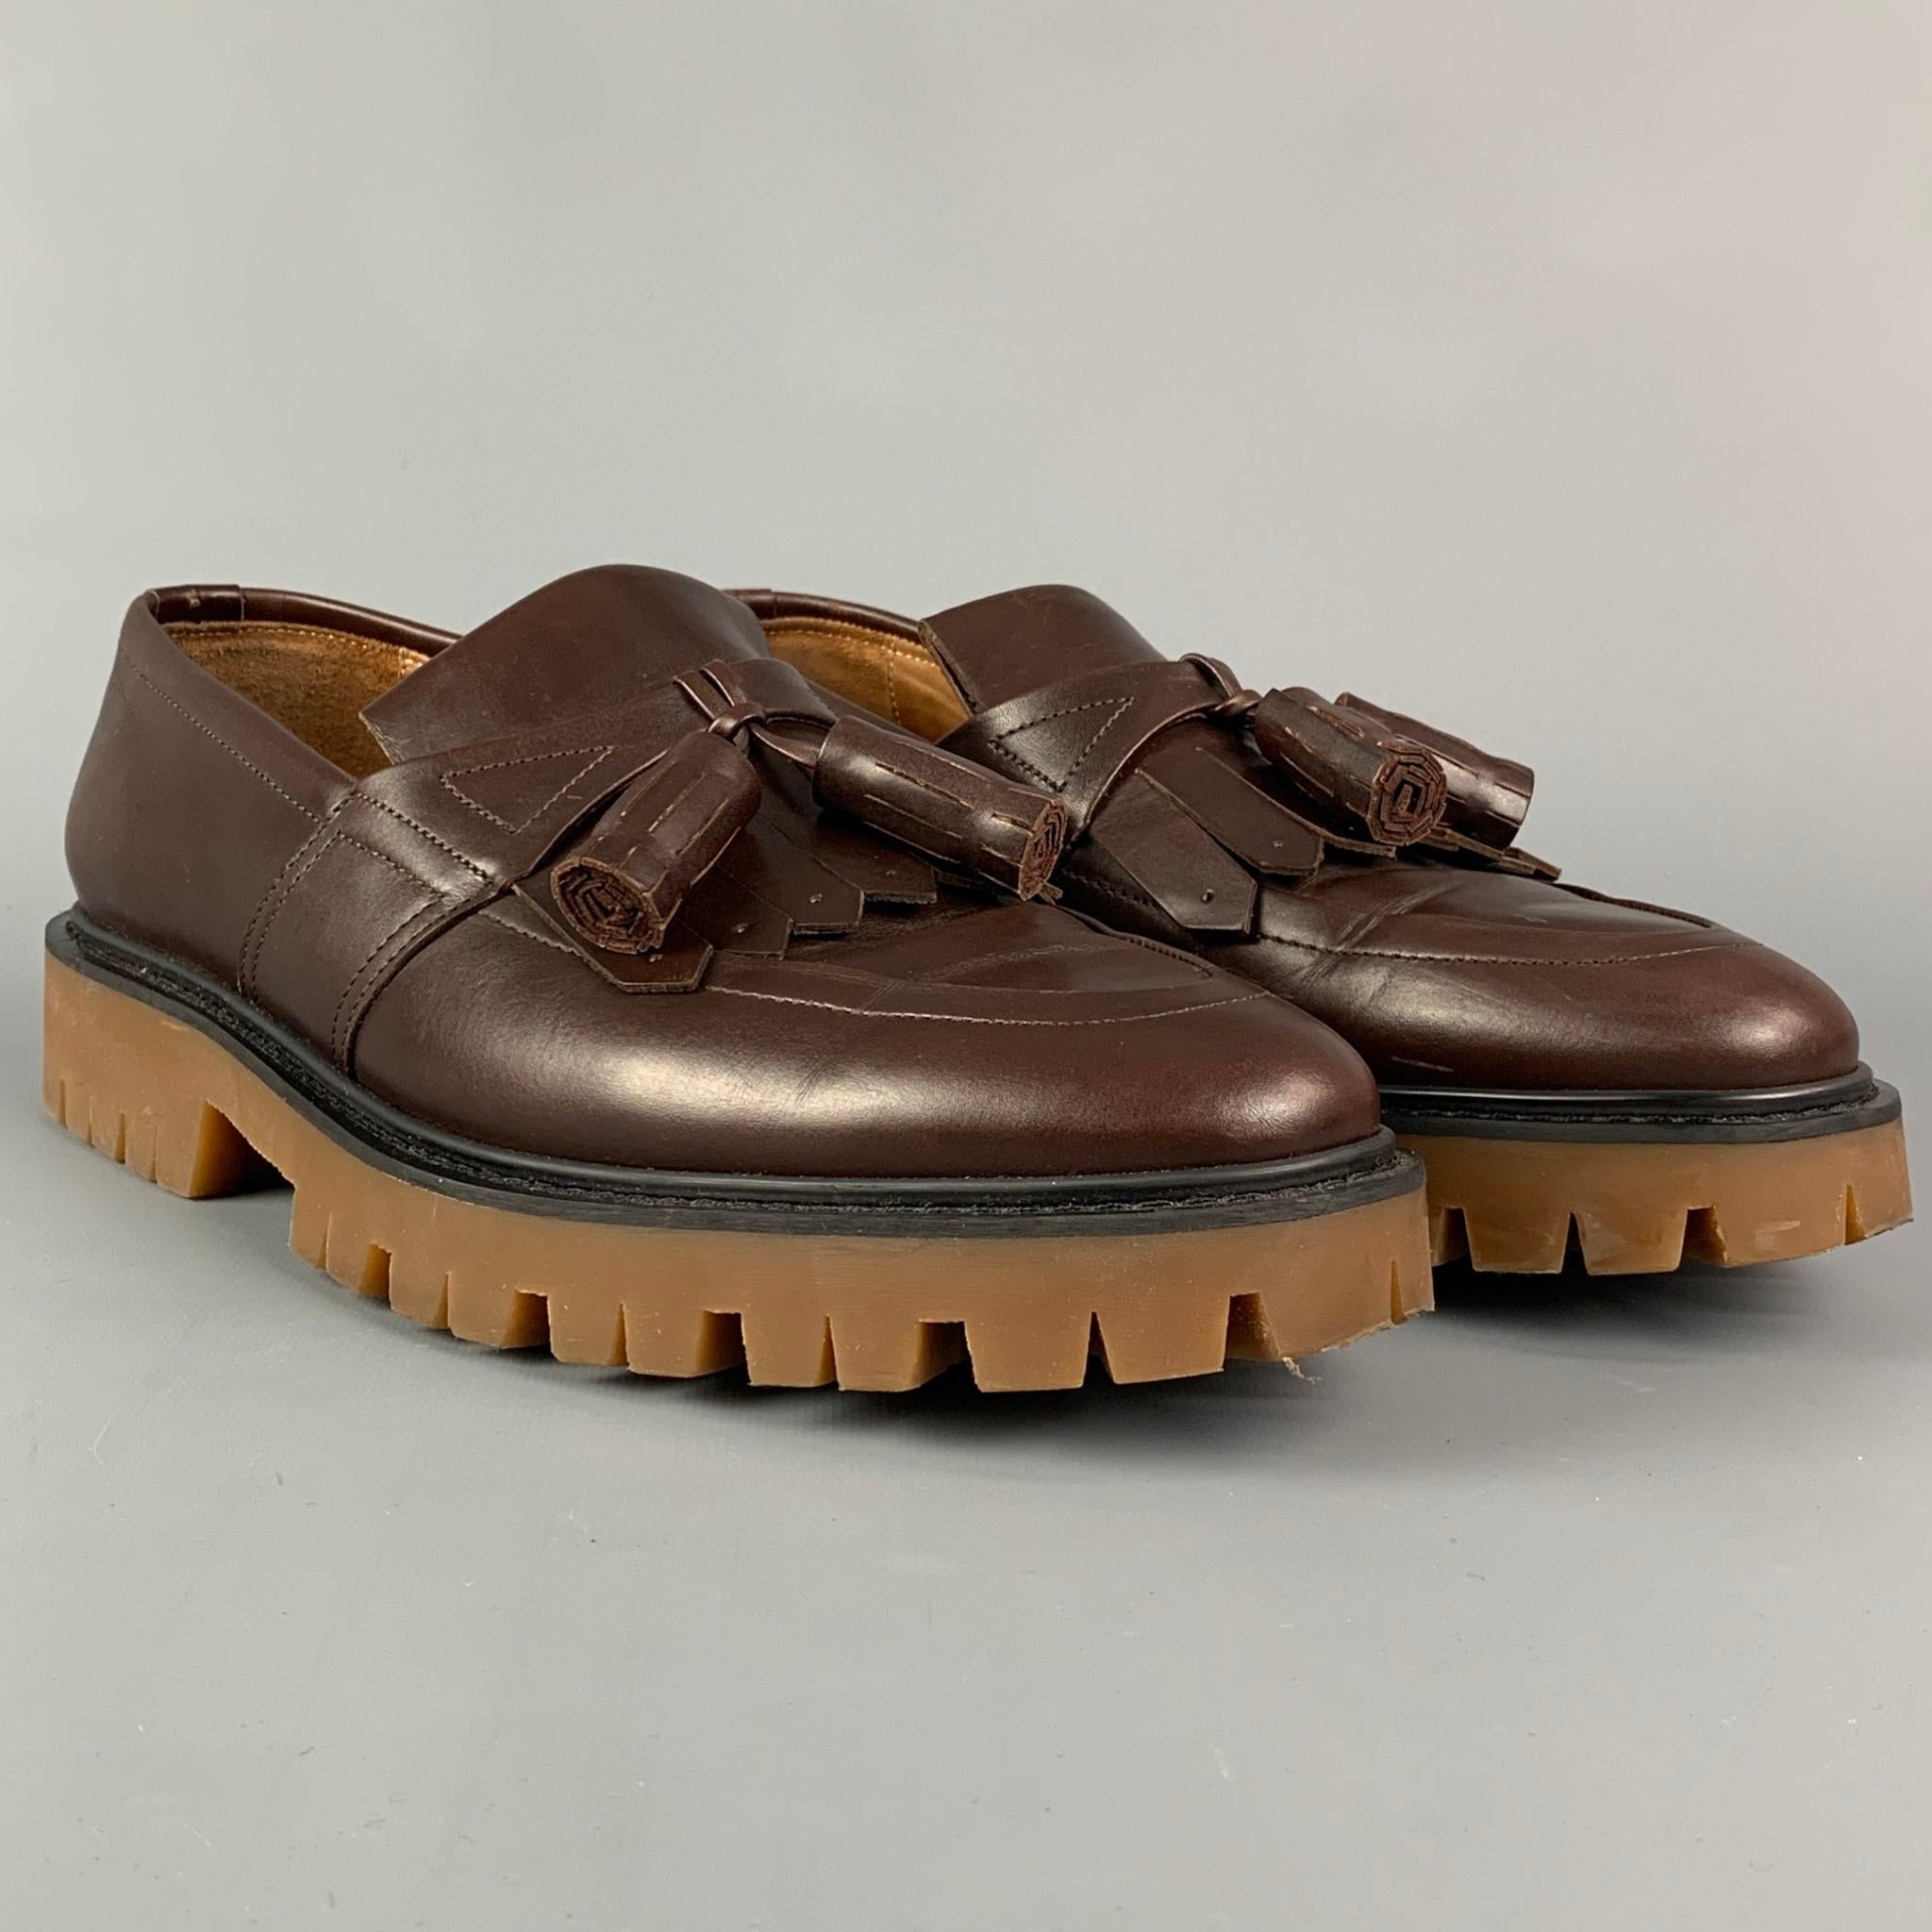 BURBERRY PRORSUM 'Cowall Loafers' shoes comes in a brown leather featuring a front tassel design, slip on, and a chunky sole. Includes box. 

Very Good Pre-Owned Condition.
Marked: 45

Outsole: 13.25 in. x 4.5 in.